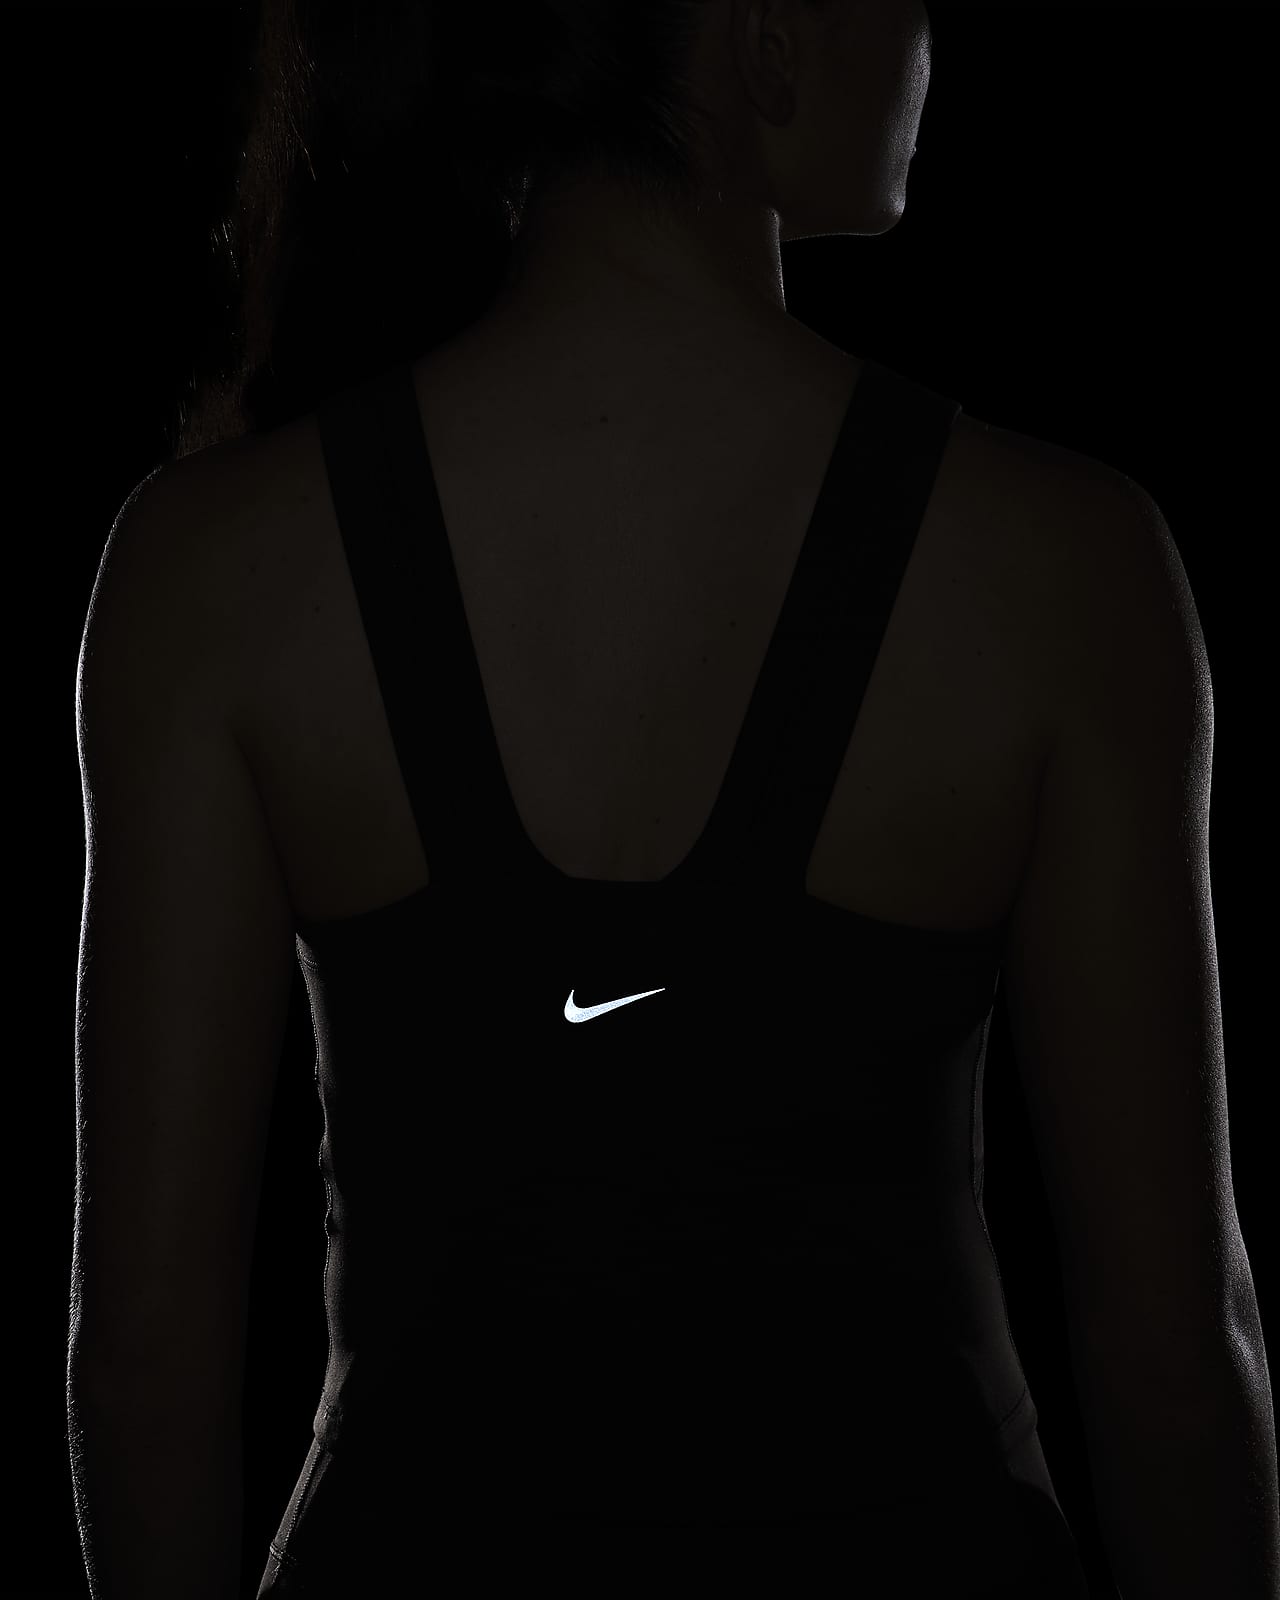 Nike One Fitted Women's Dri-FIT Strappy Cropped Tank Top